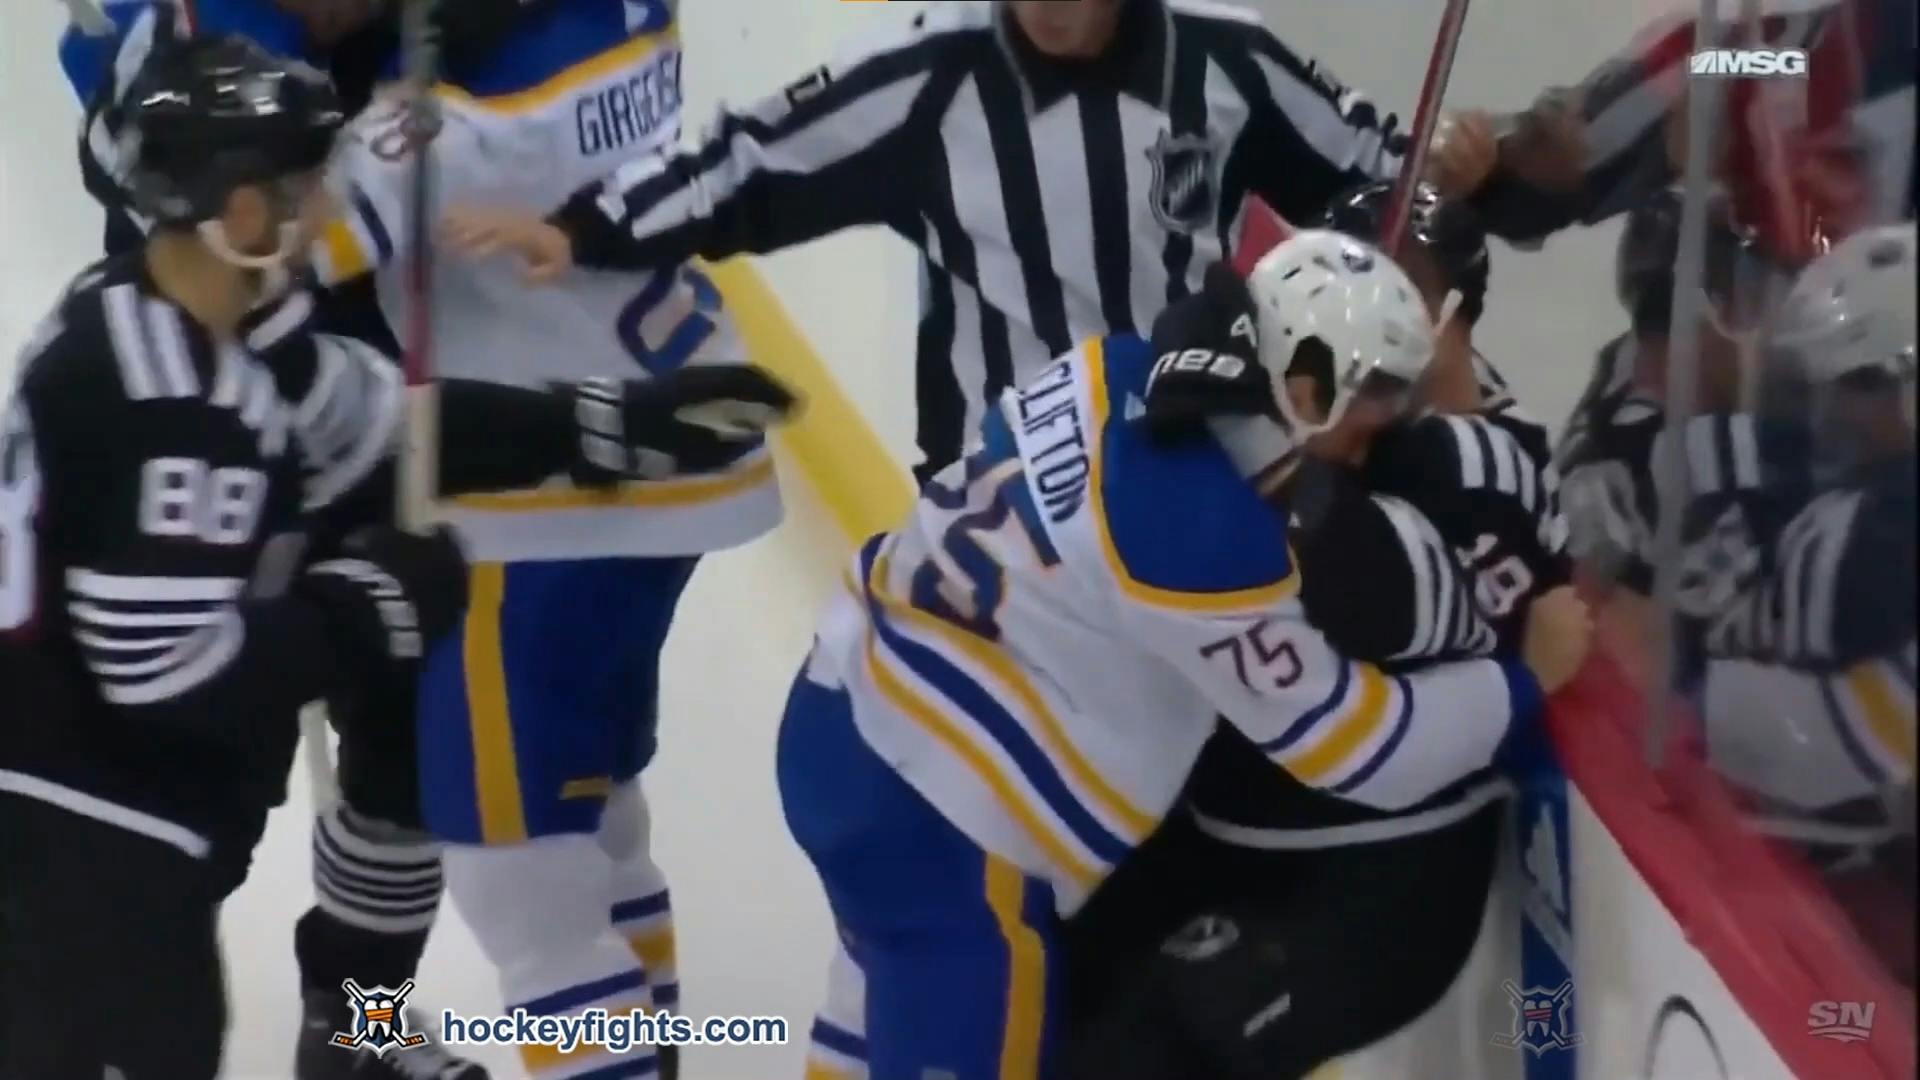 Is this the end of hockey fights?